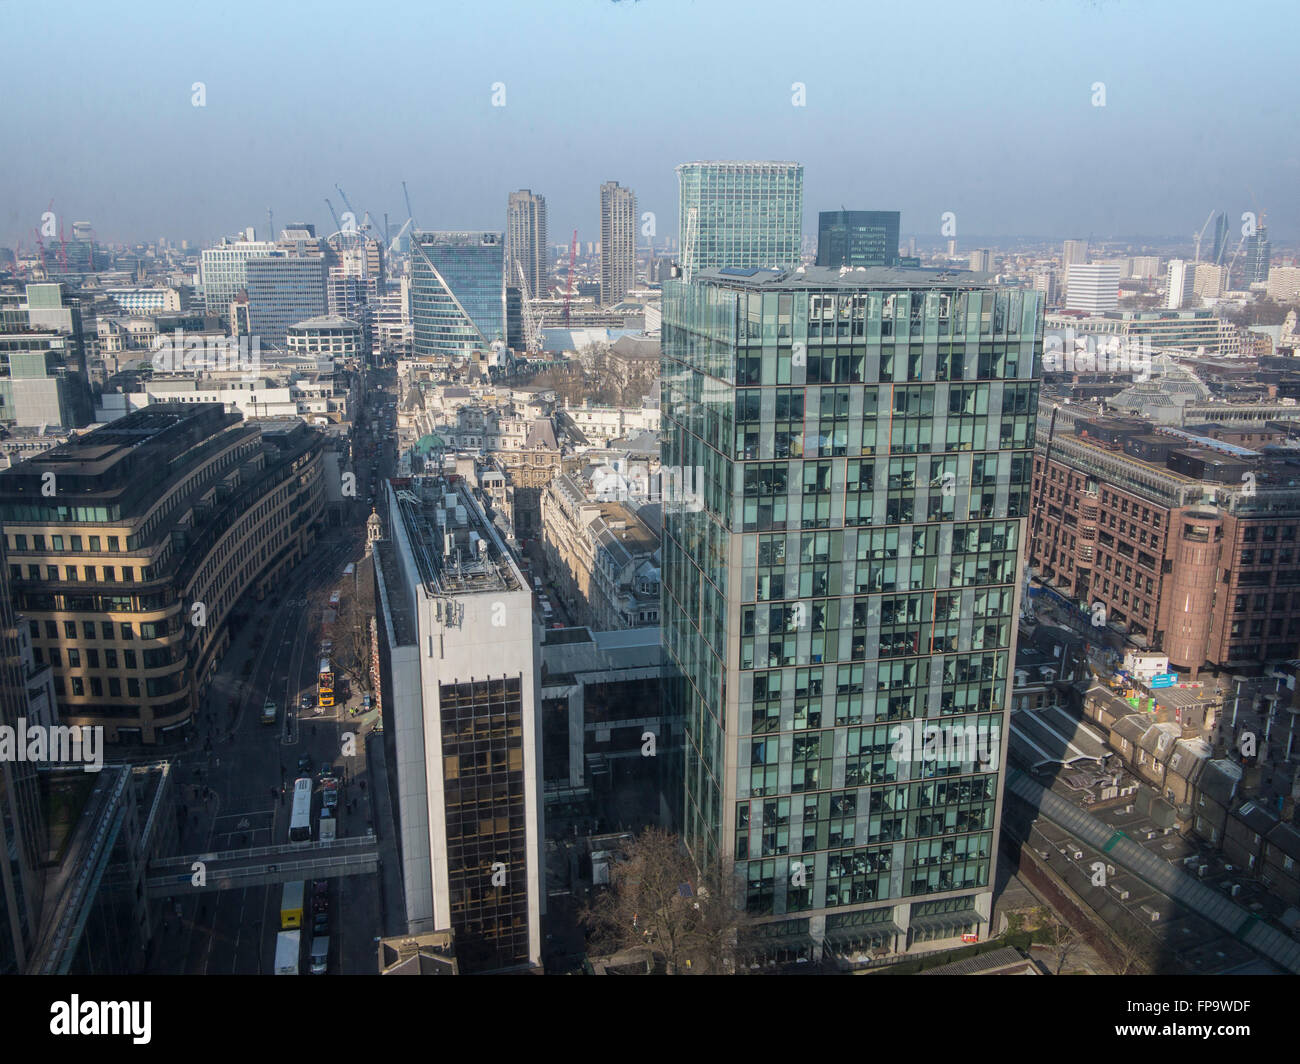 Aerial view of the City of London Stock Photo